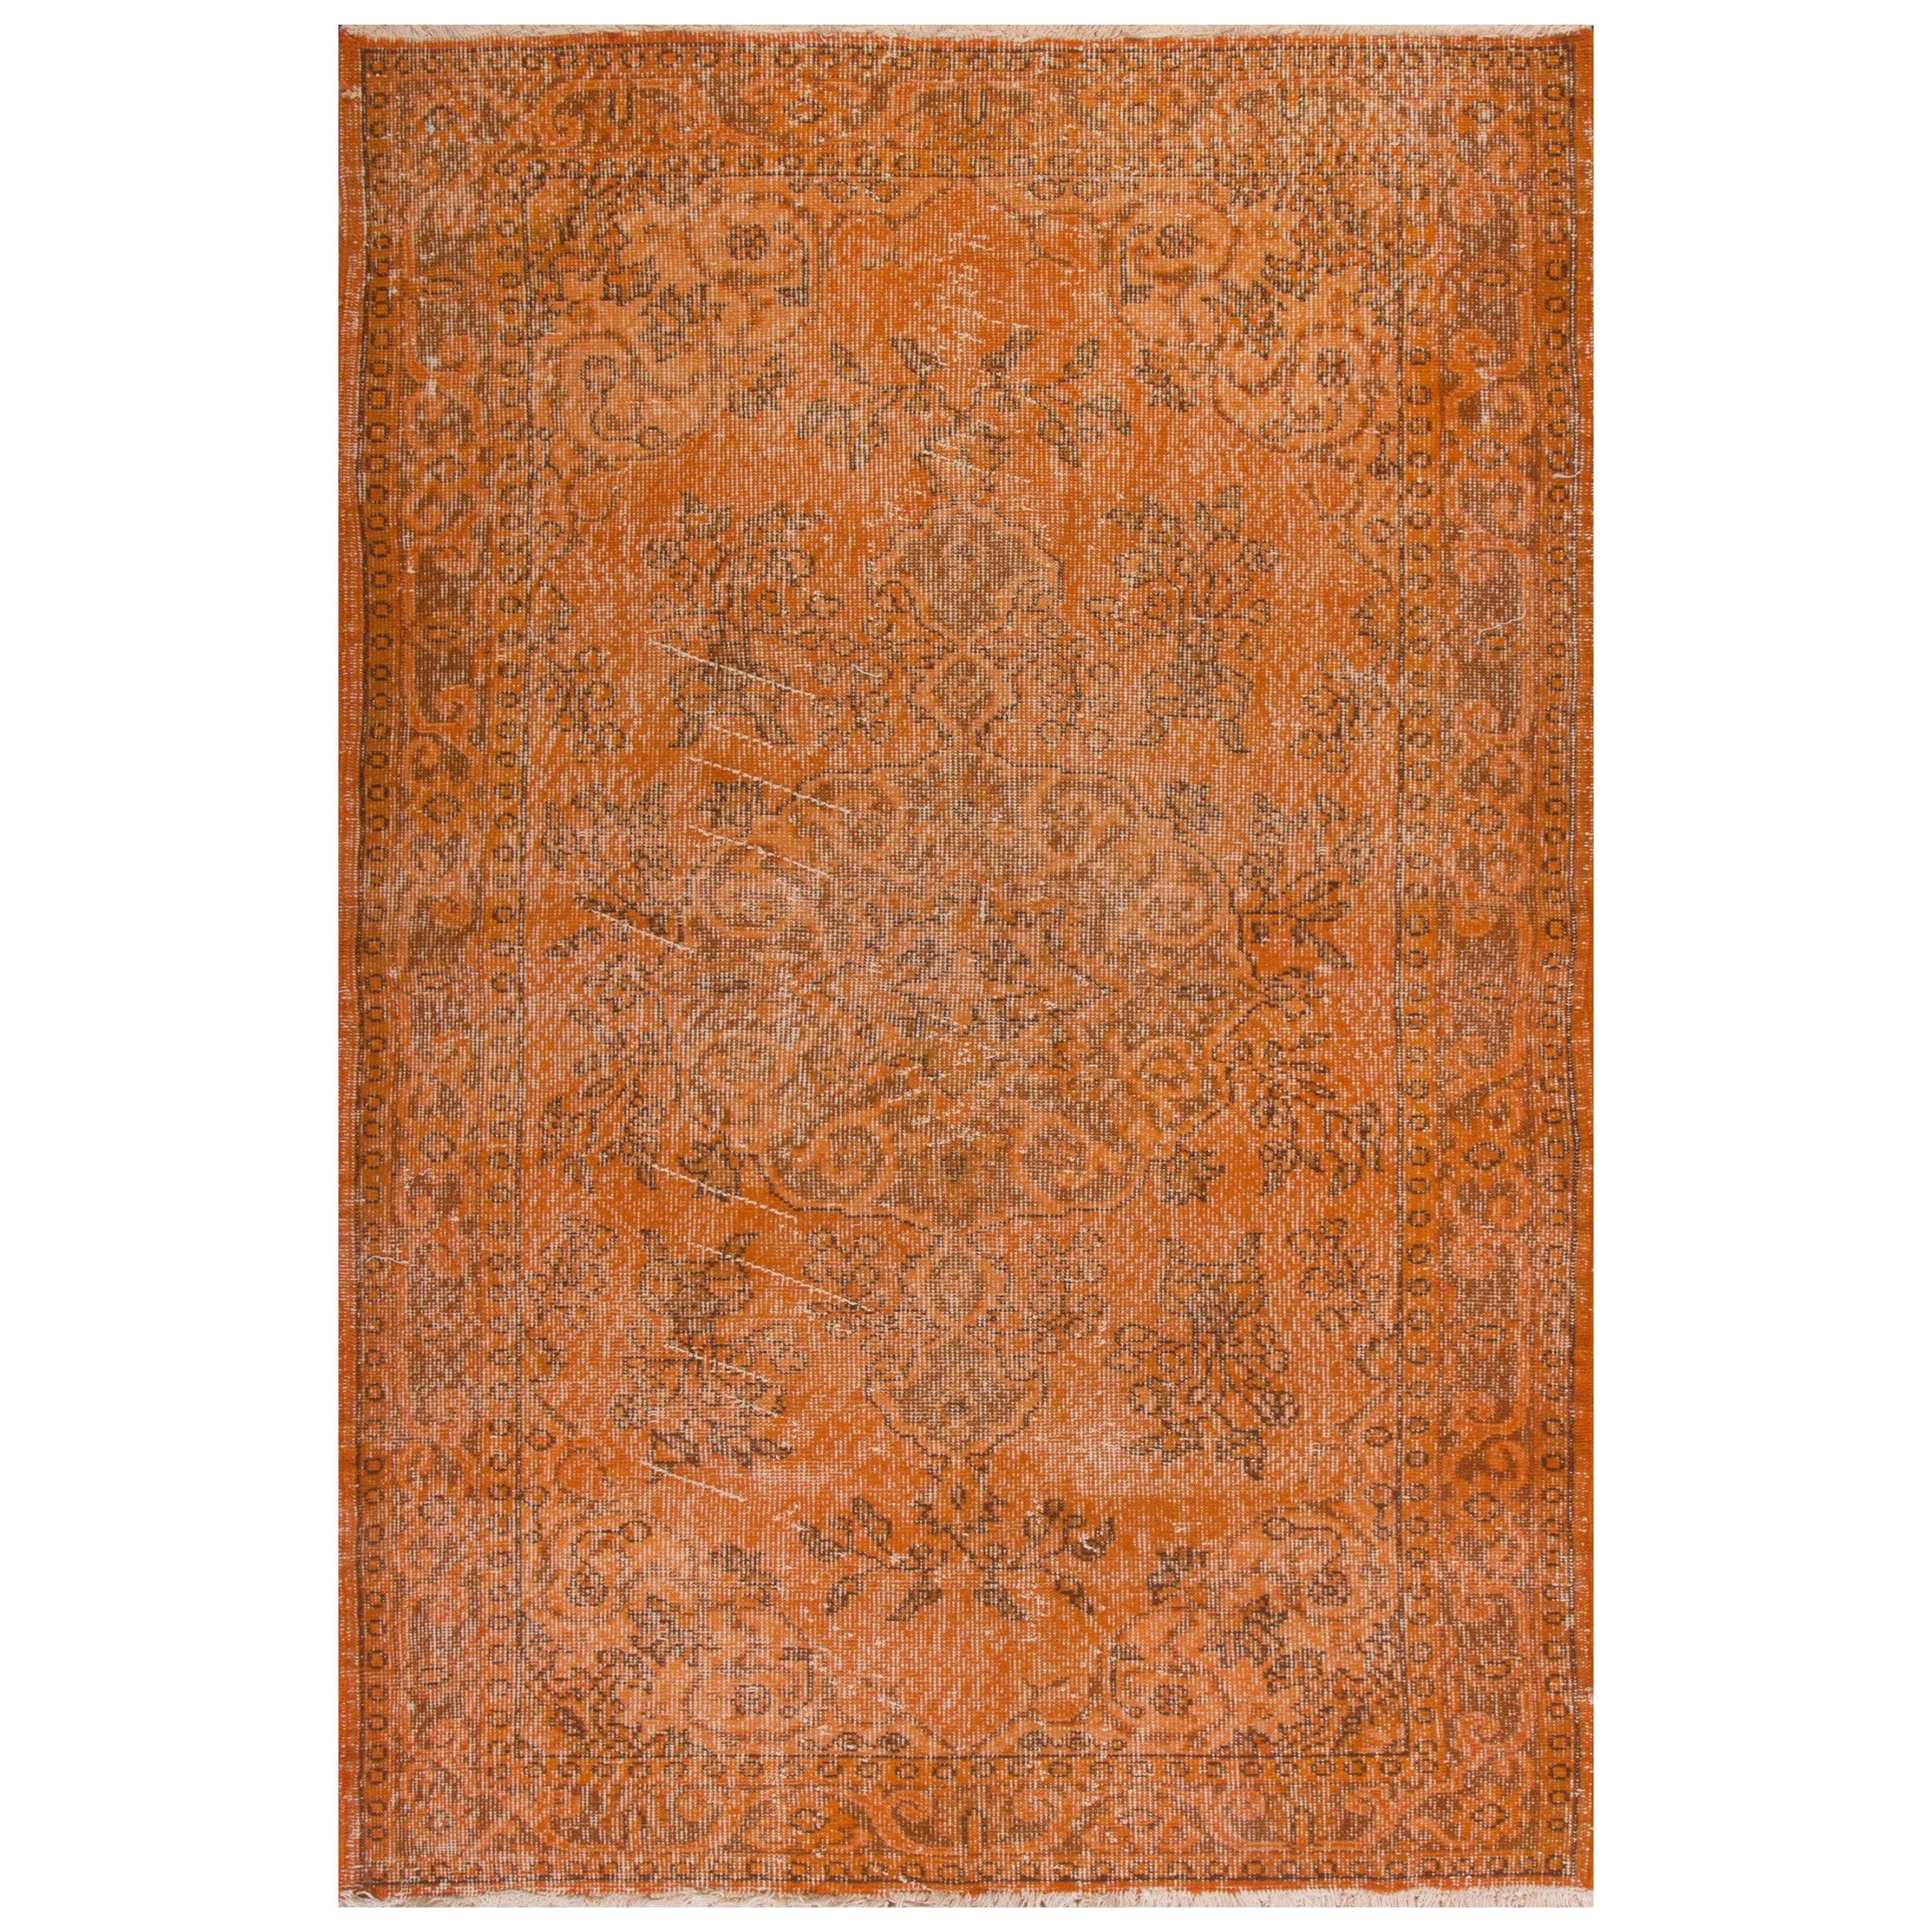 4x7.4 Ft Home Decor Vintage Hand Knotted Oriental Rug Overdyed in Burnt Orange